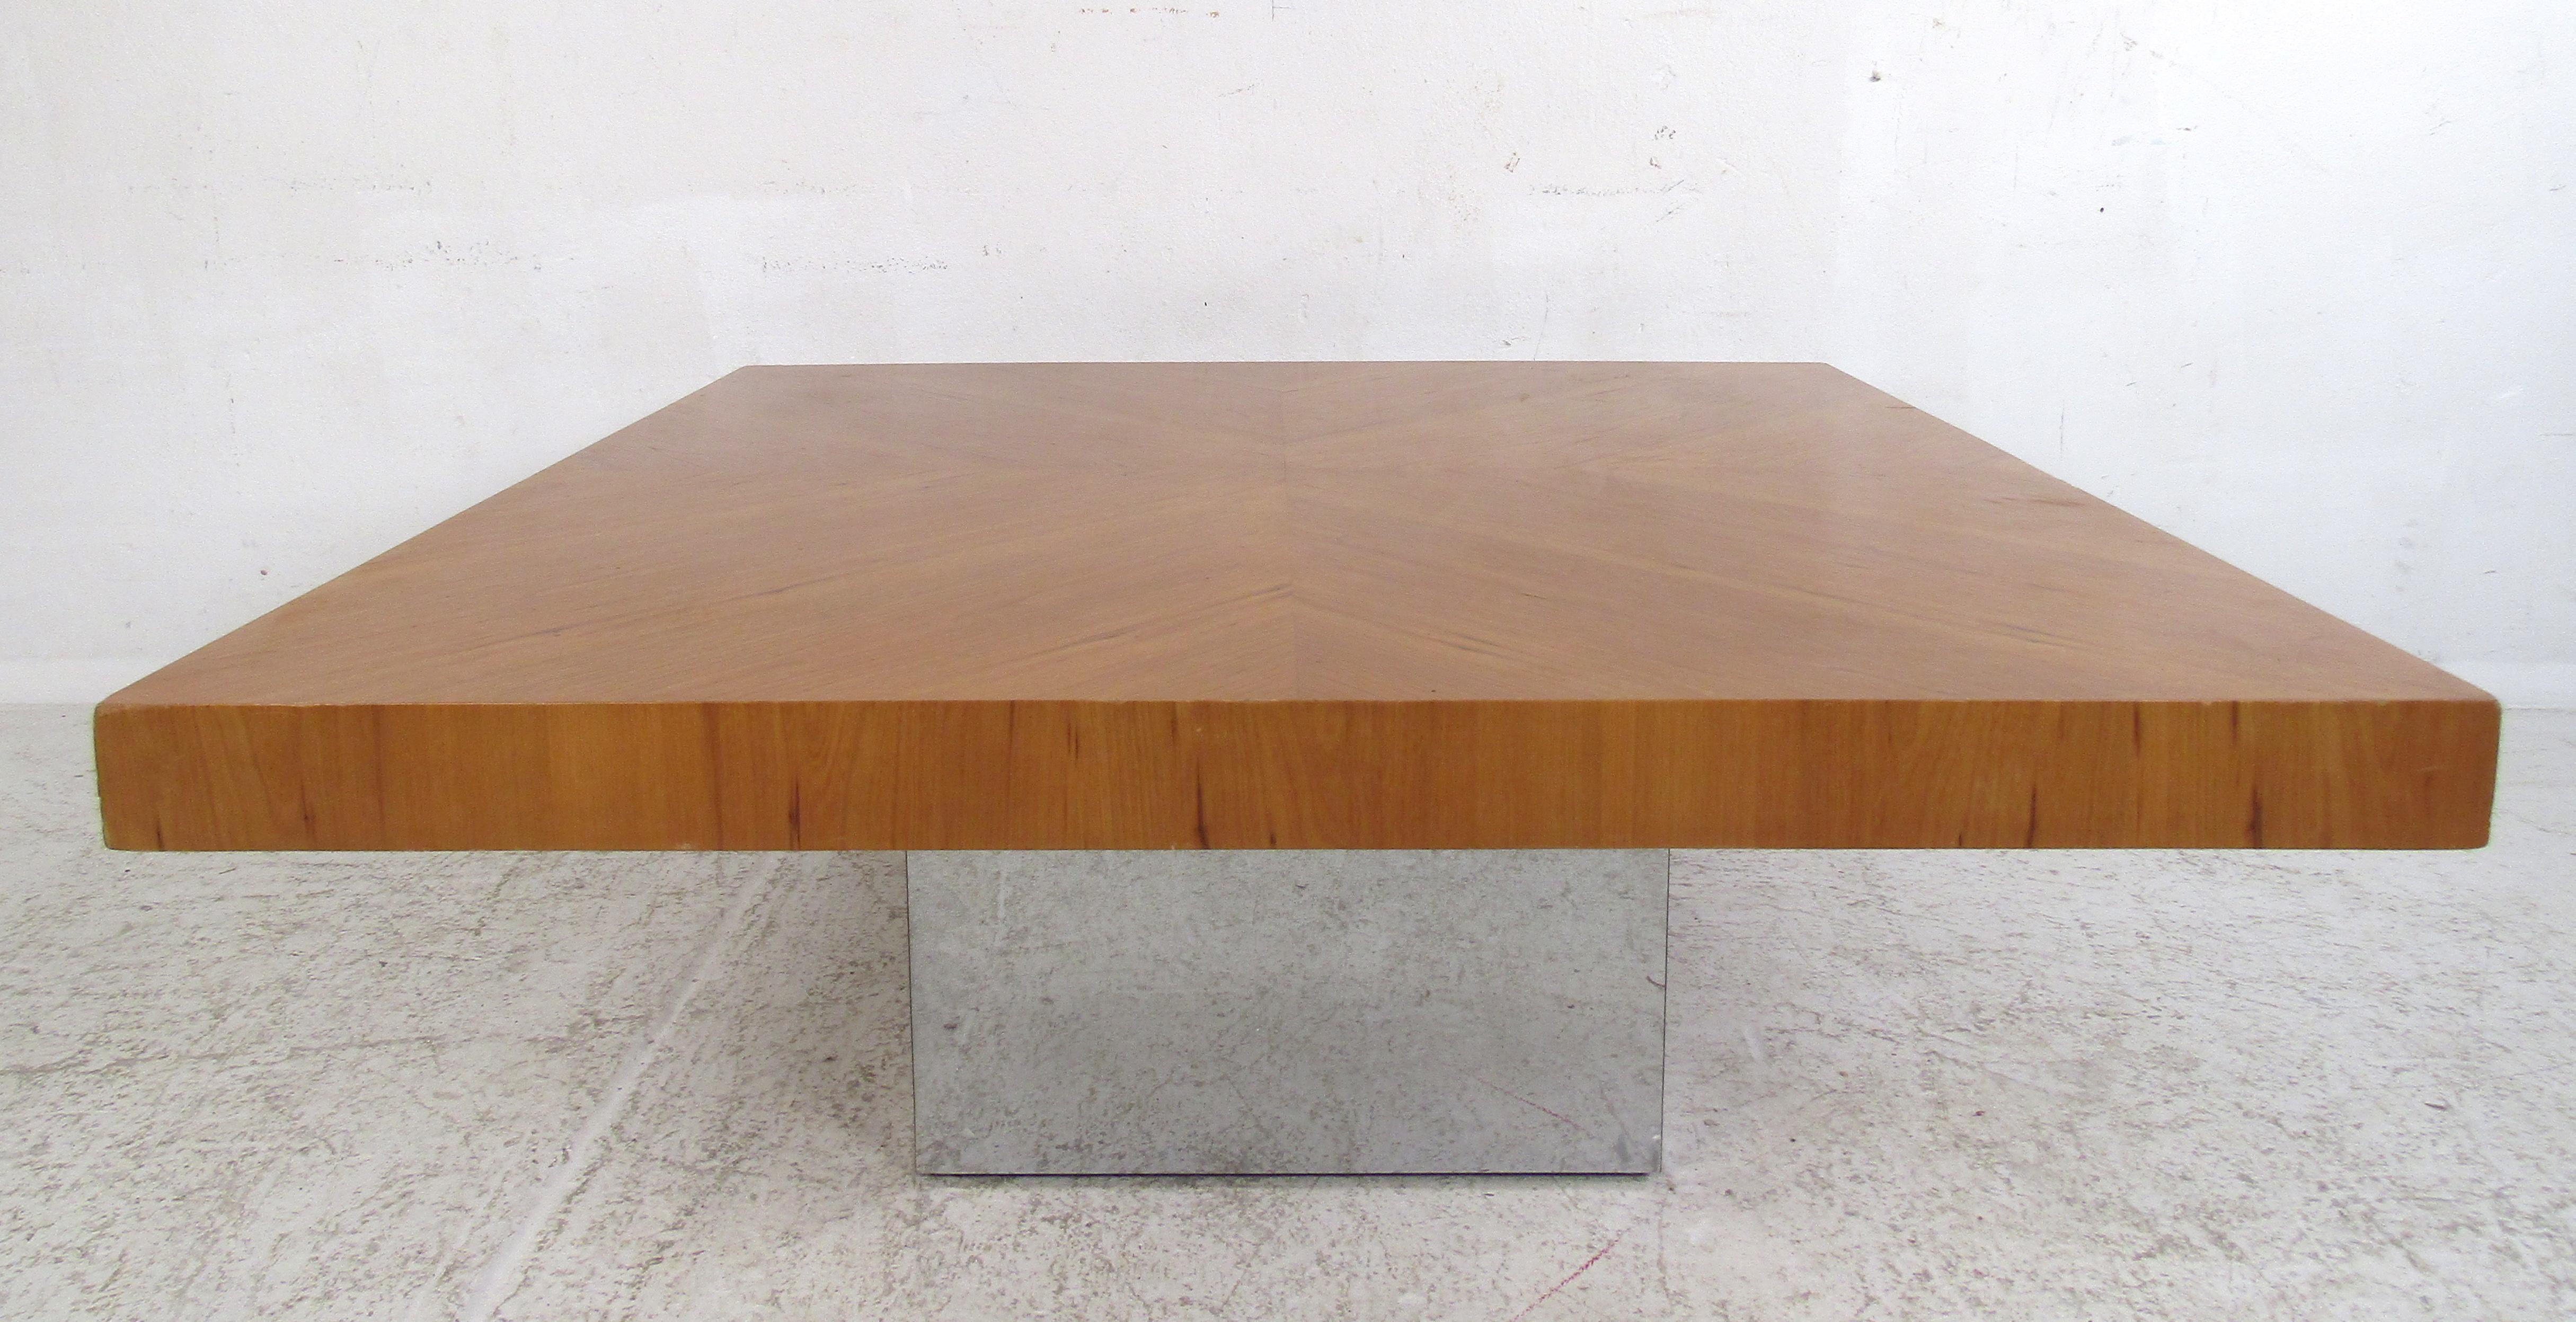 This stunning vintage modern coffee table boasts a matchstick woodgrain top with the grain running in different directions. A unique design that comfortably sits on a cubed pedestal chrome base. A square cocktail table that is sure to fit perfectly